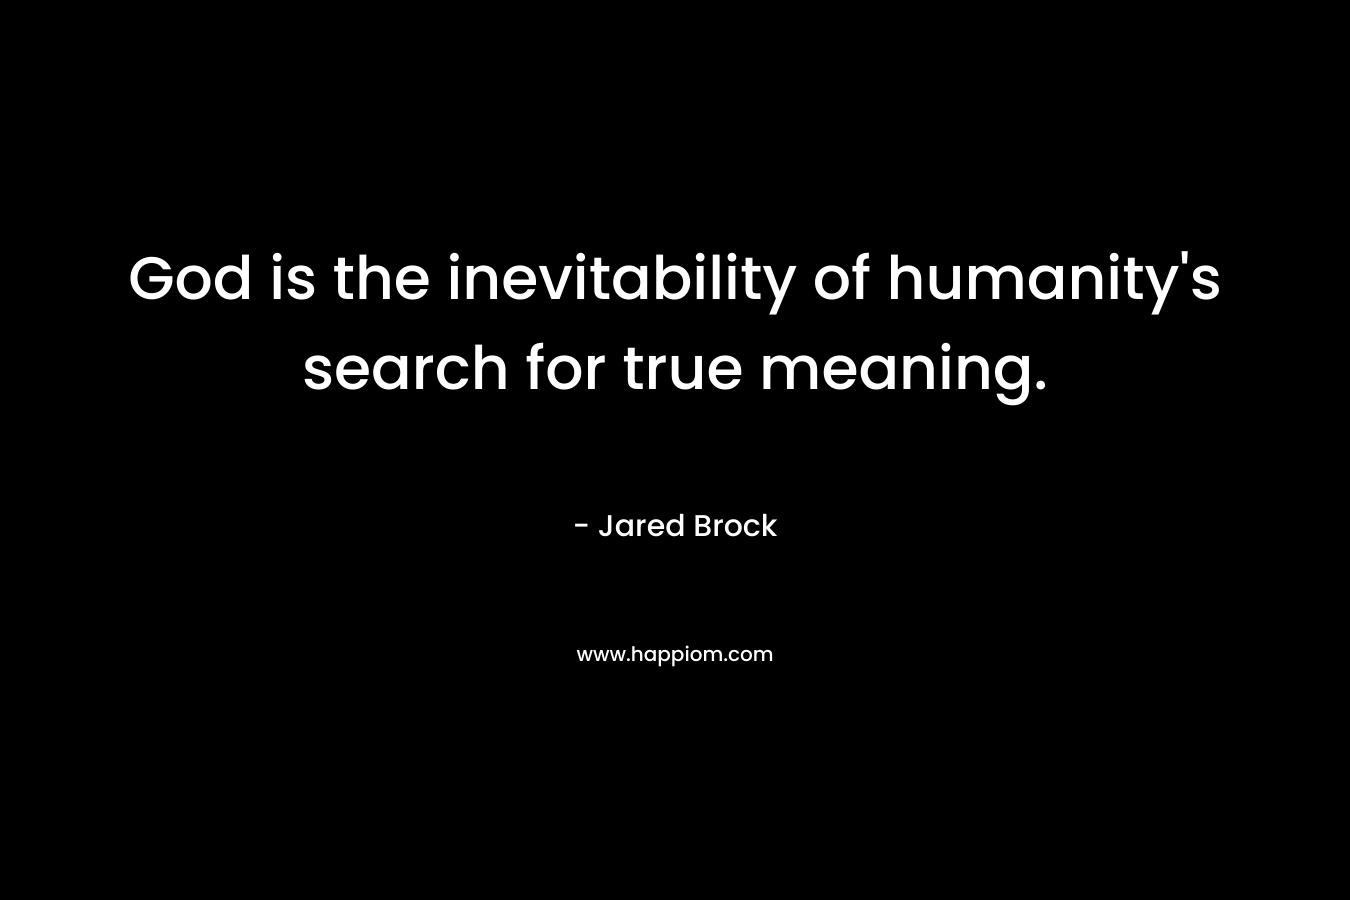 God is the inevitability of humanity’s search for true meaning. – Jared Brock